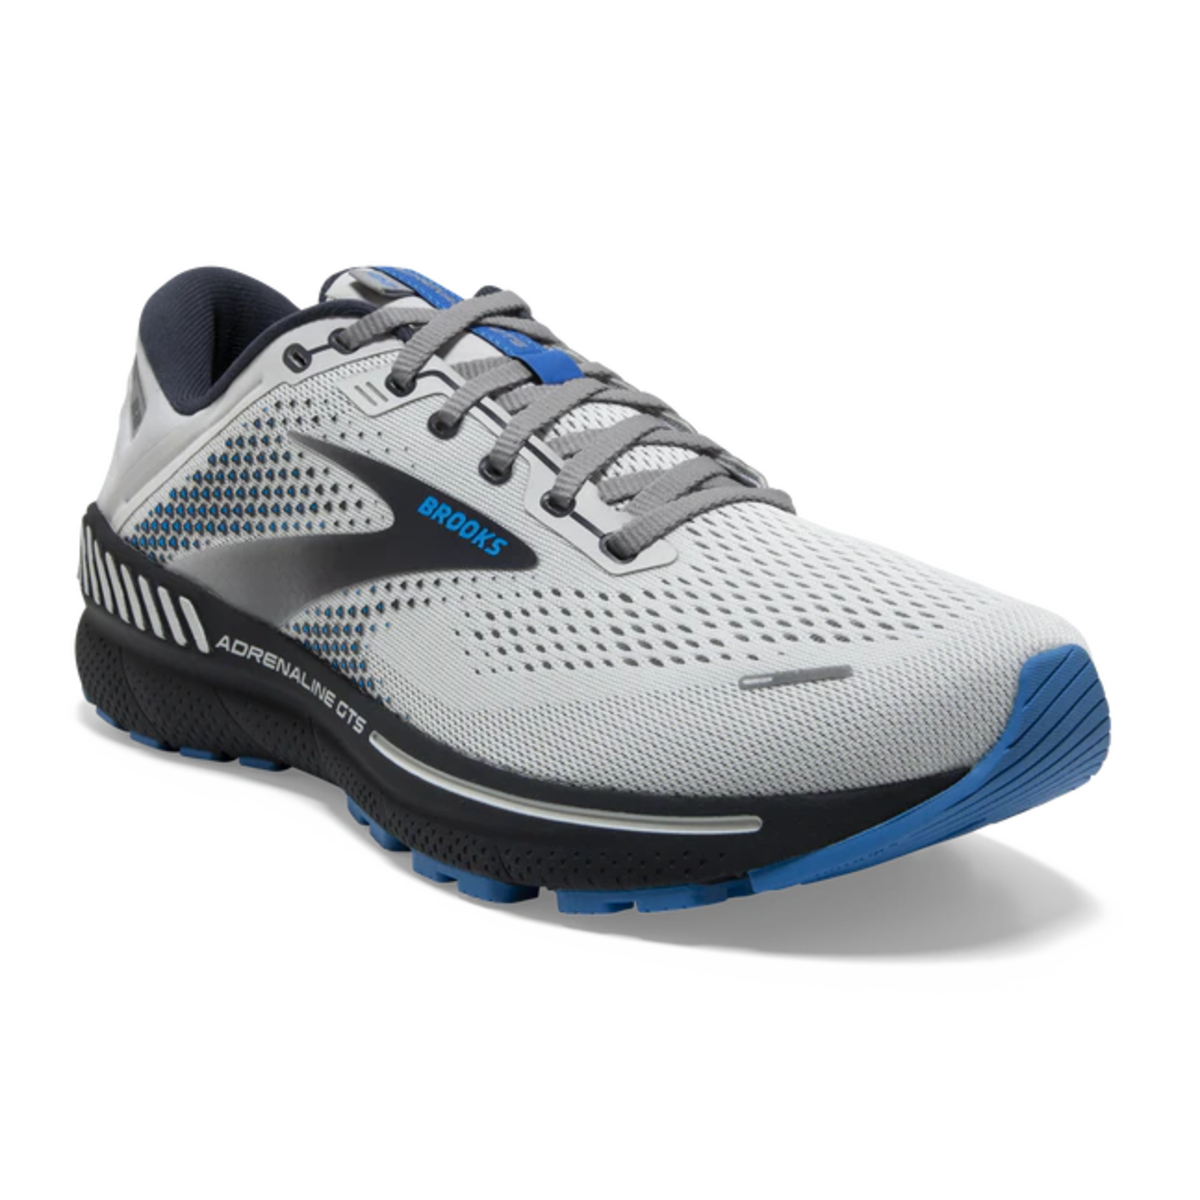 Brooks Adrenaline GTS 22 in Oyster/India ink